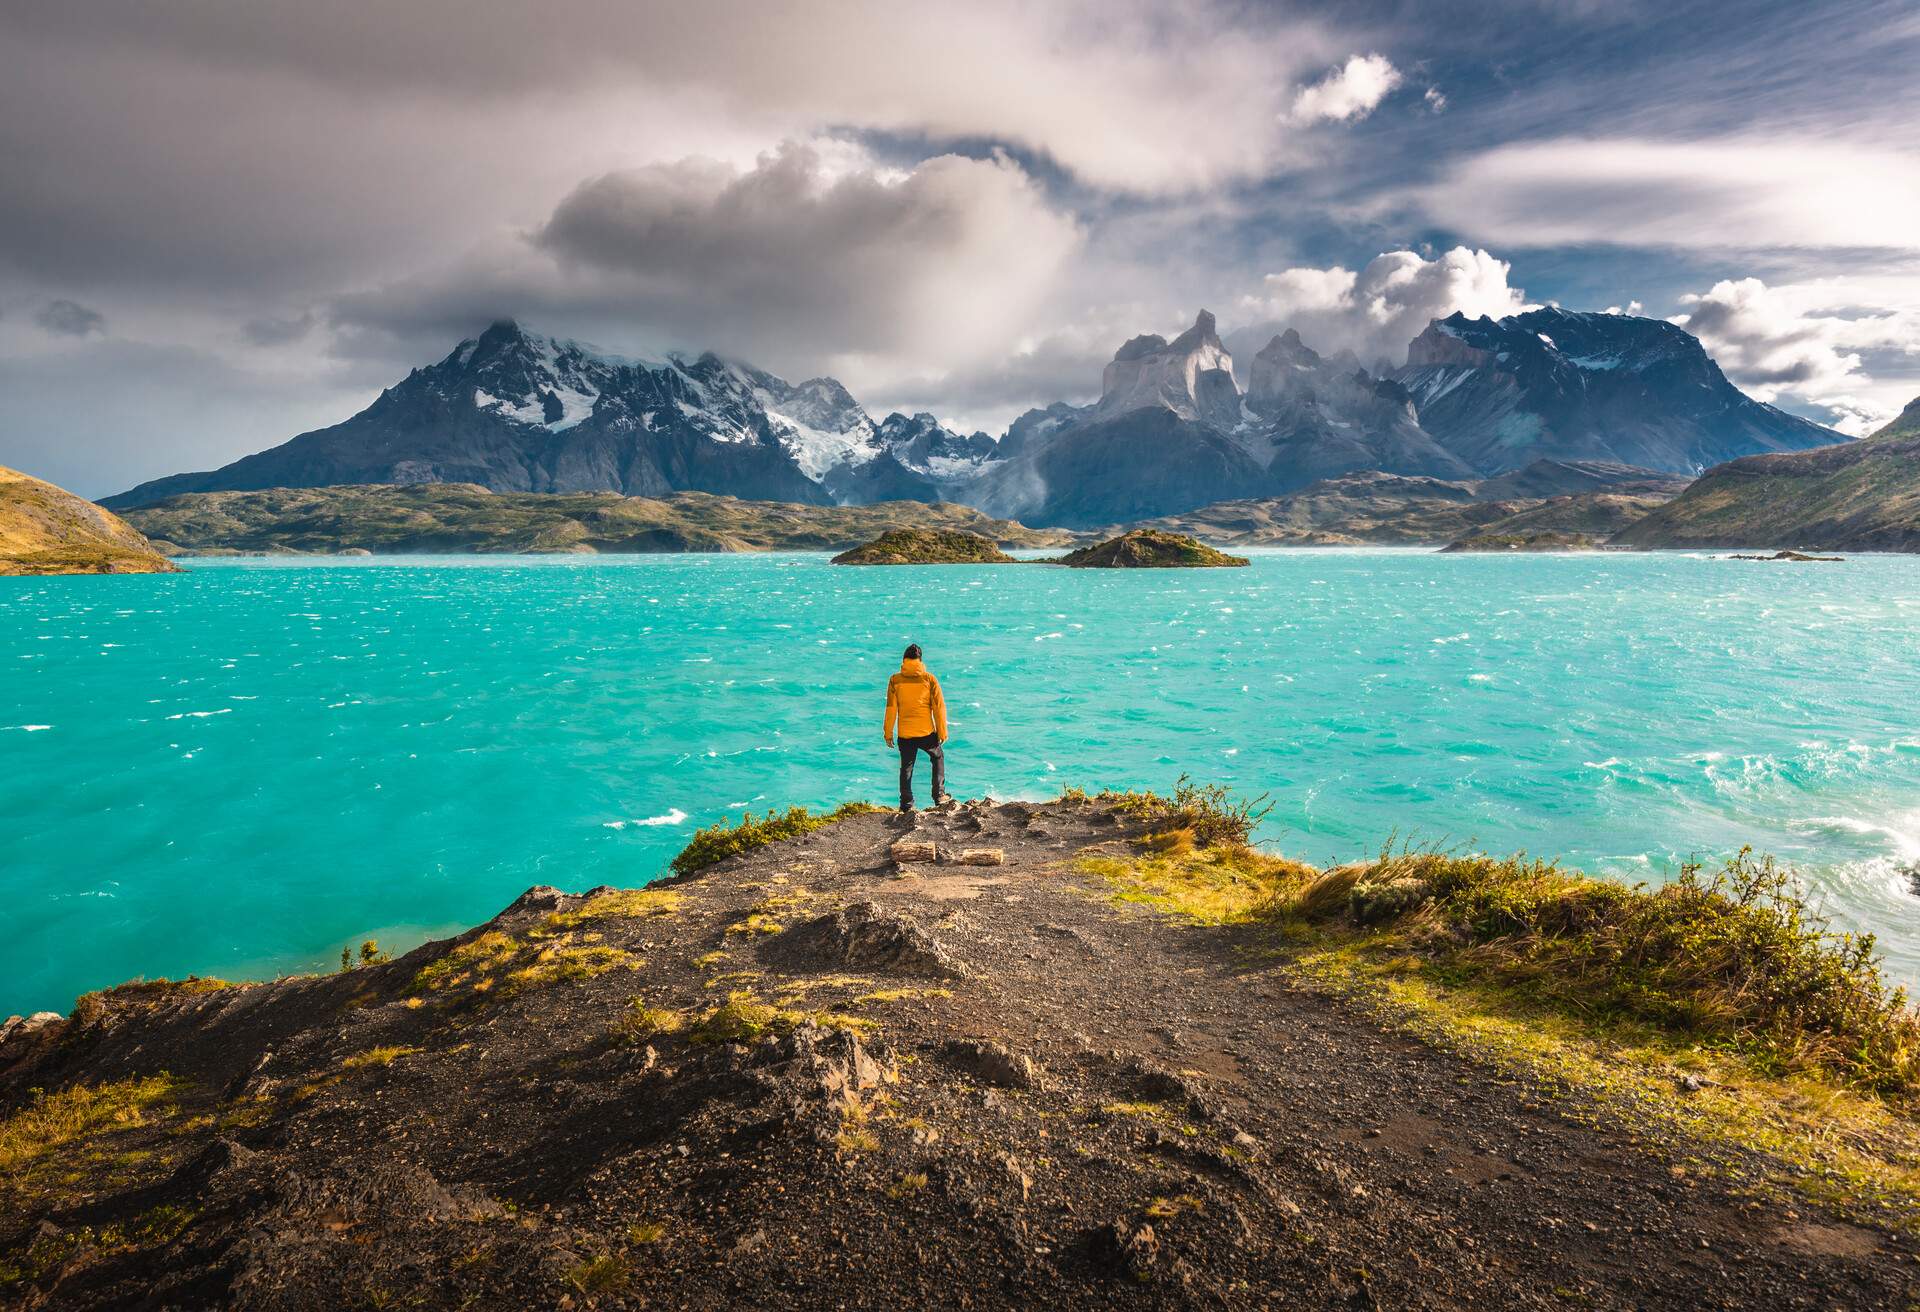 CHILE_MAGALLANES_TORRES-DEL-PAINE-NATIONAL-PARK_MAN_PERSON_LAKE_MOUNTAINS